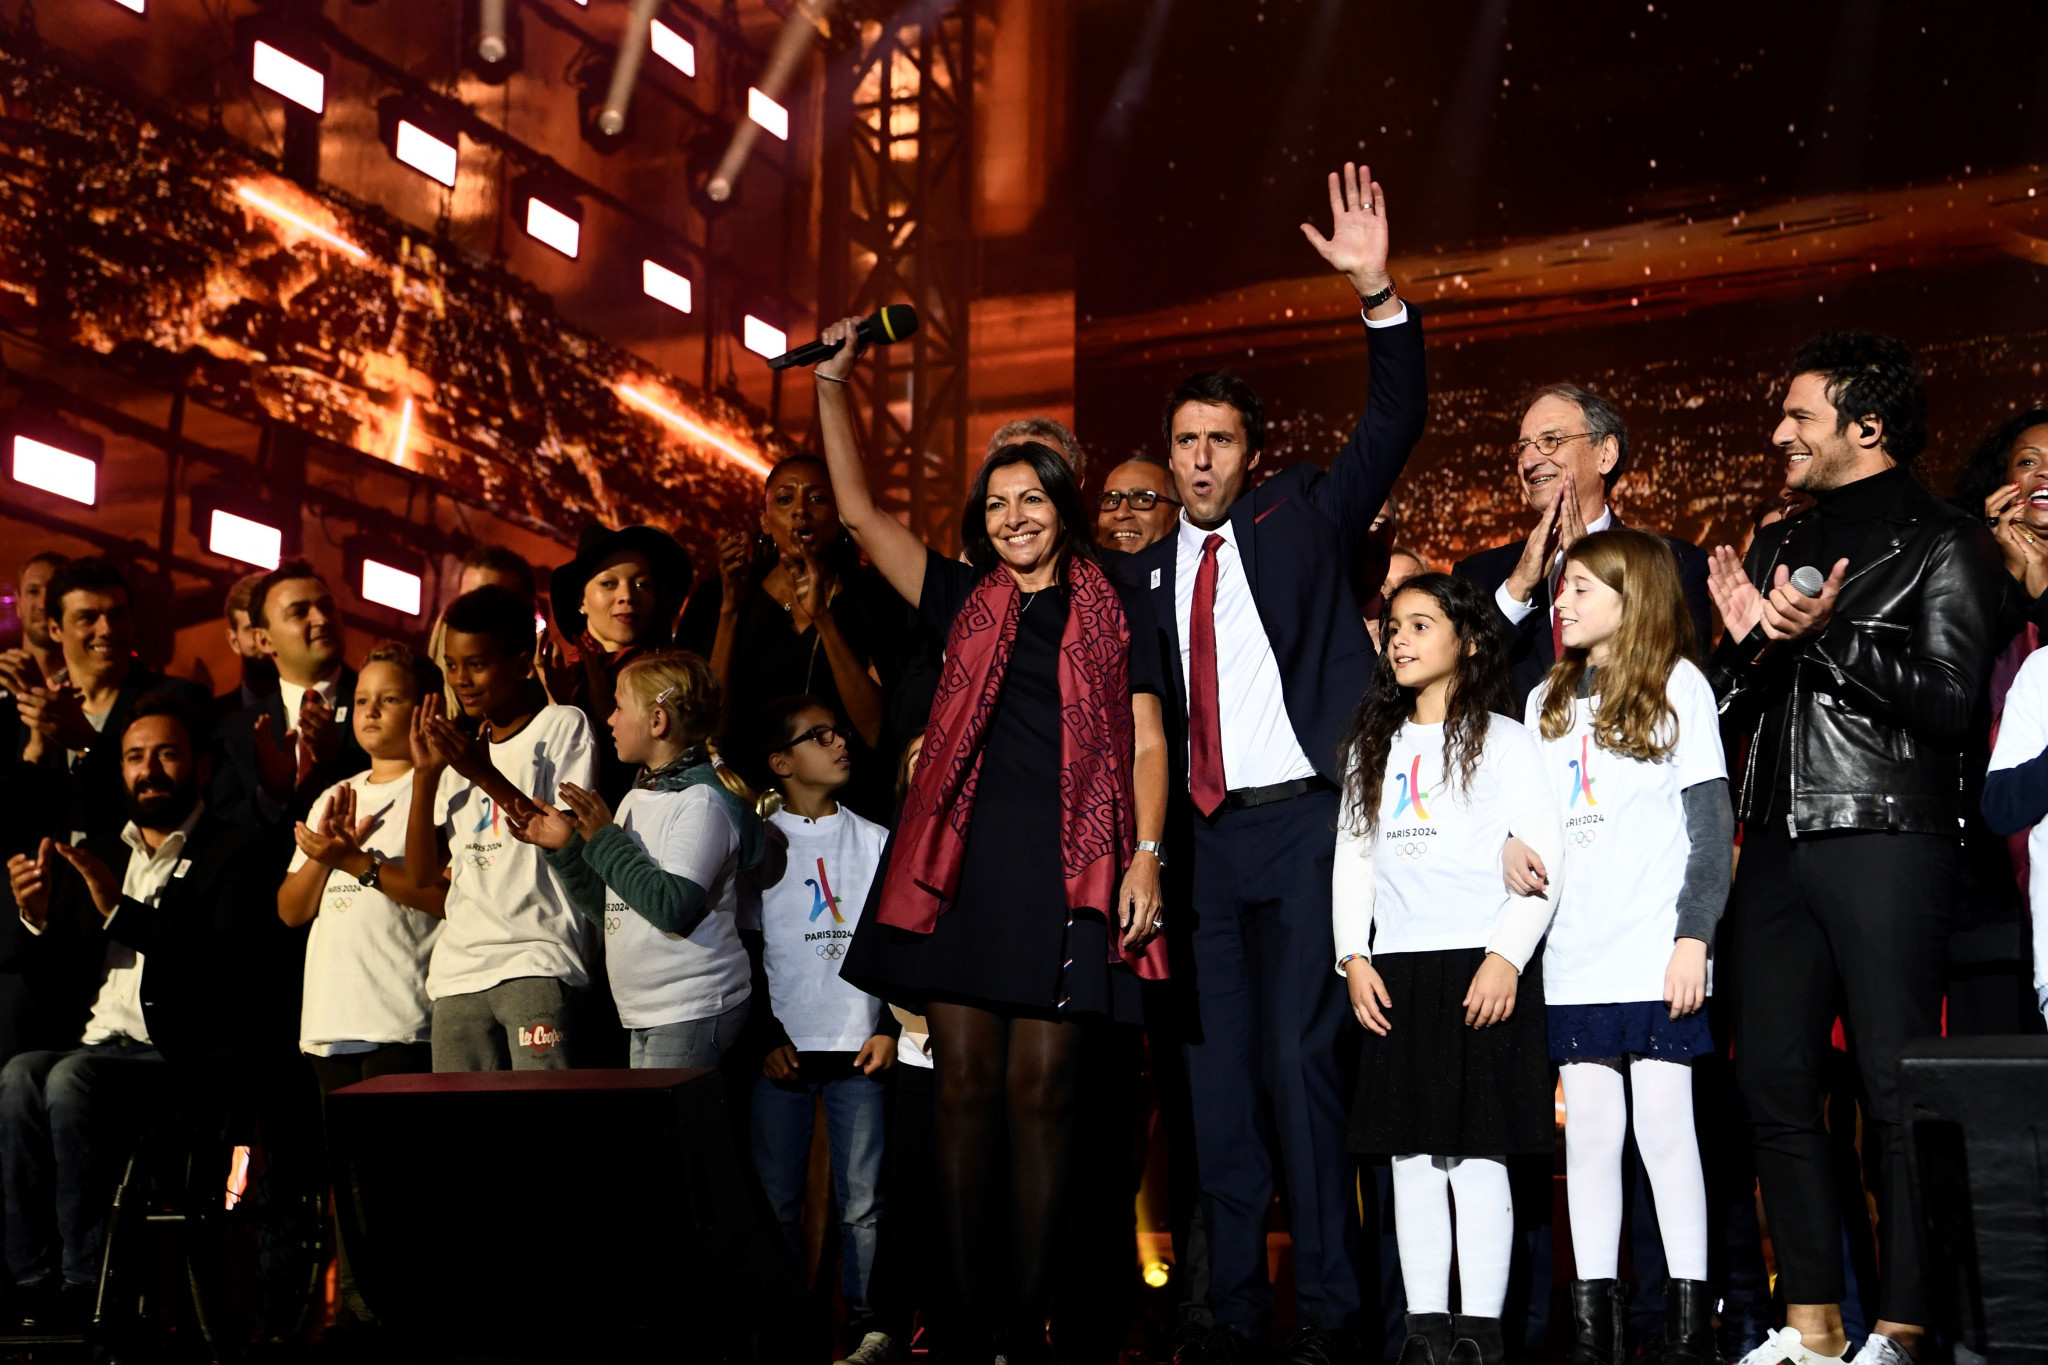 Paris 2024 hold celebratory concert after award of Olympic and Paralympic Games